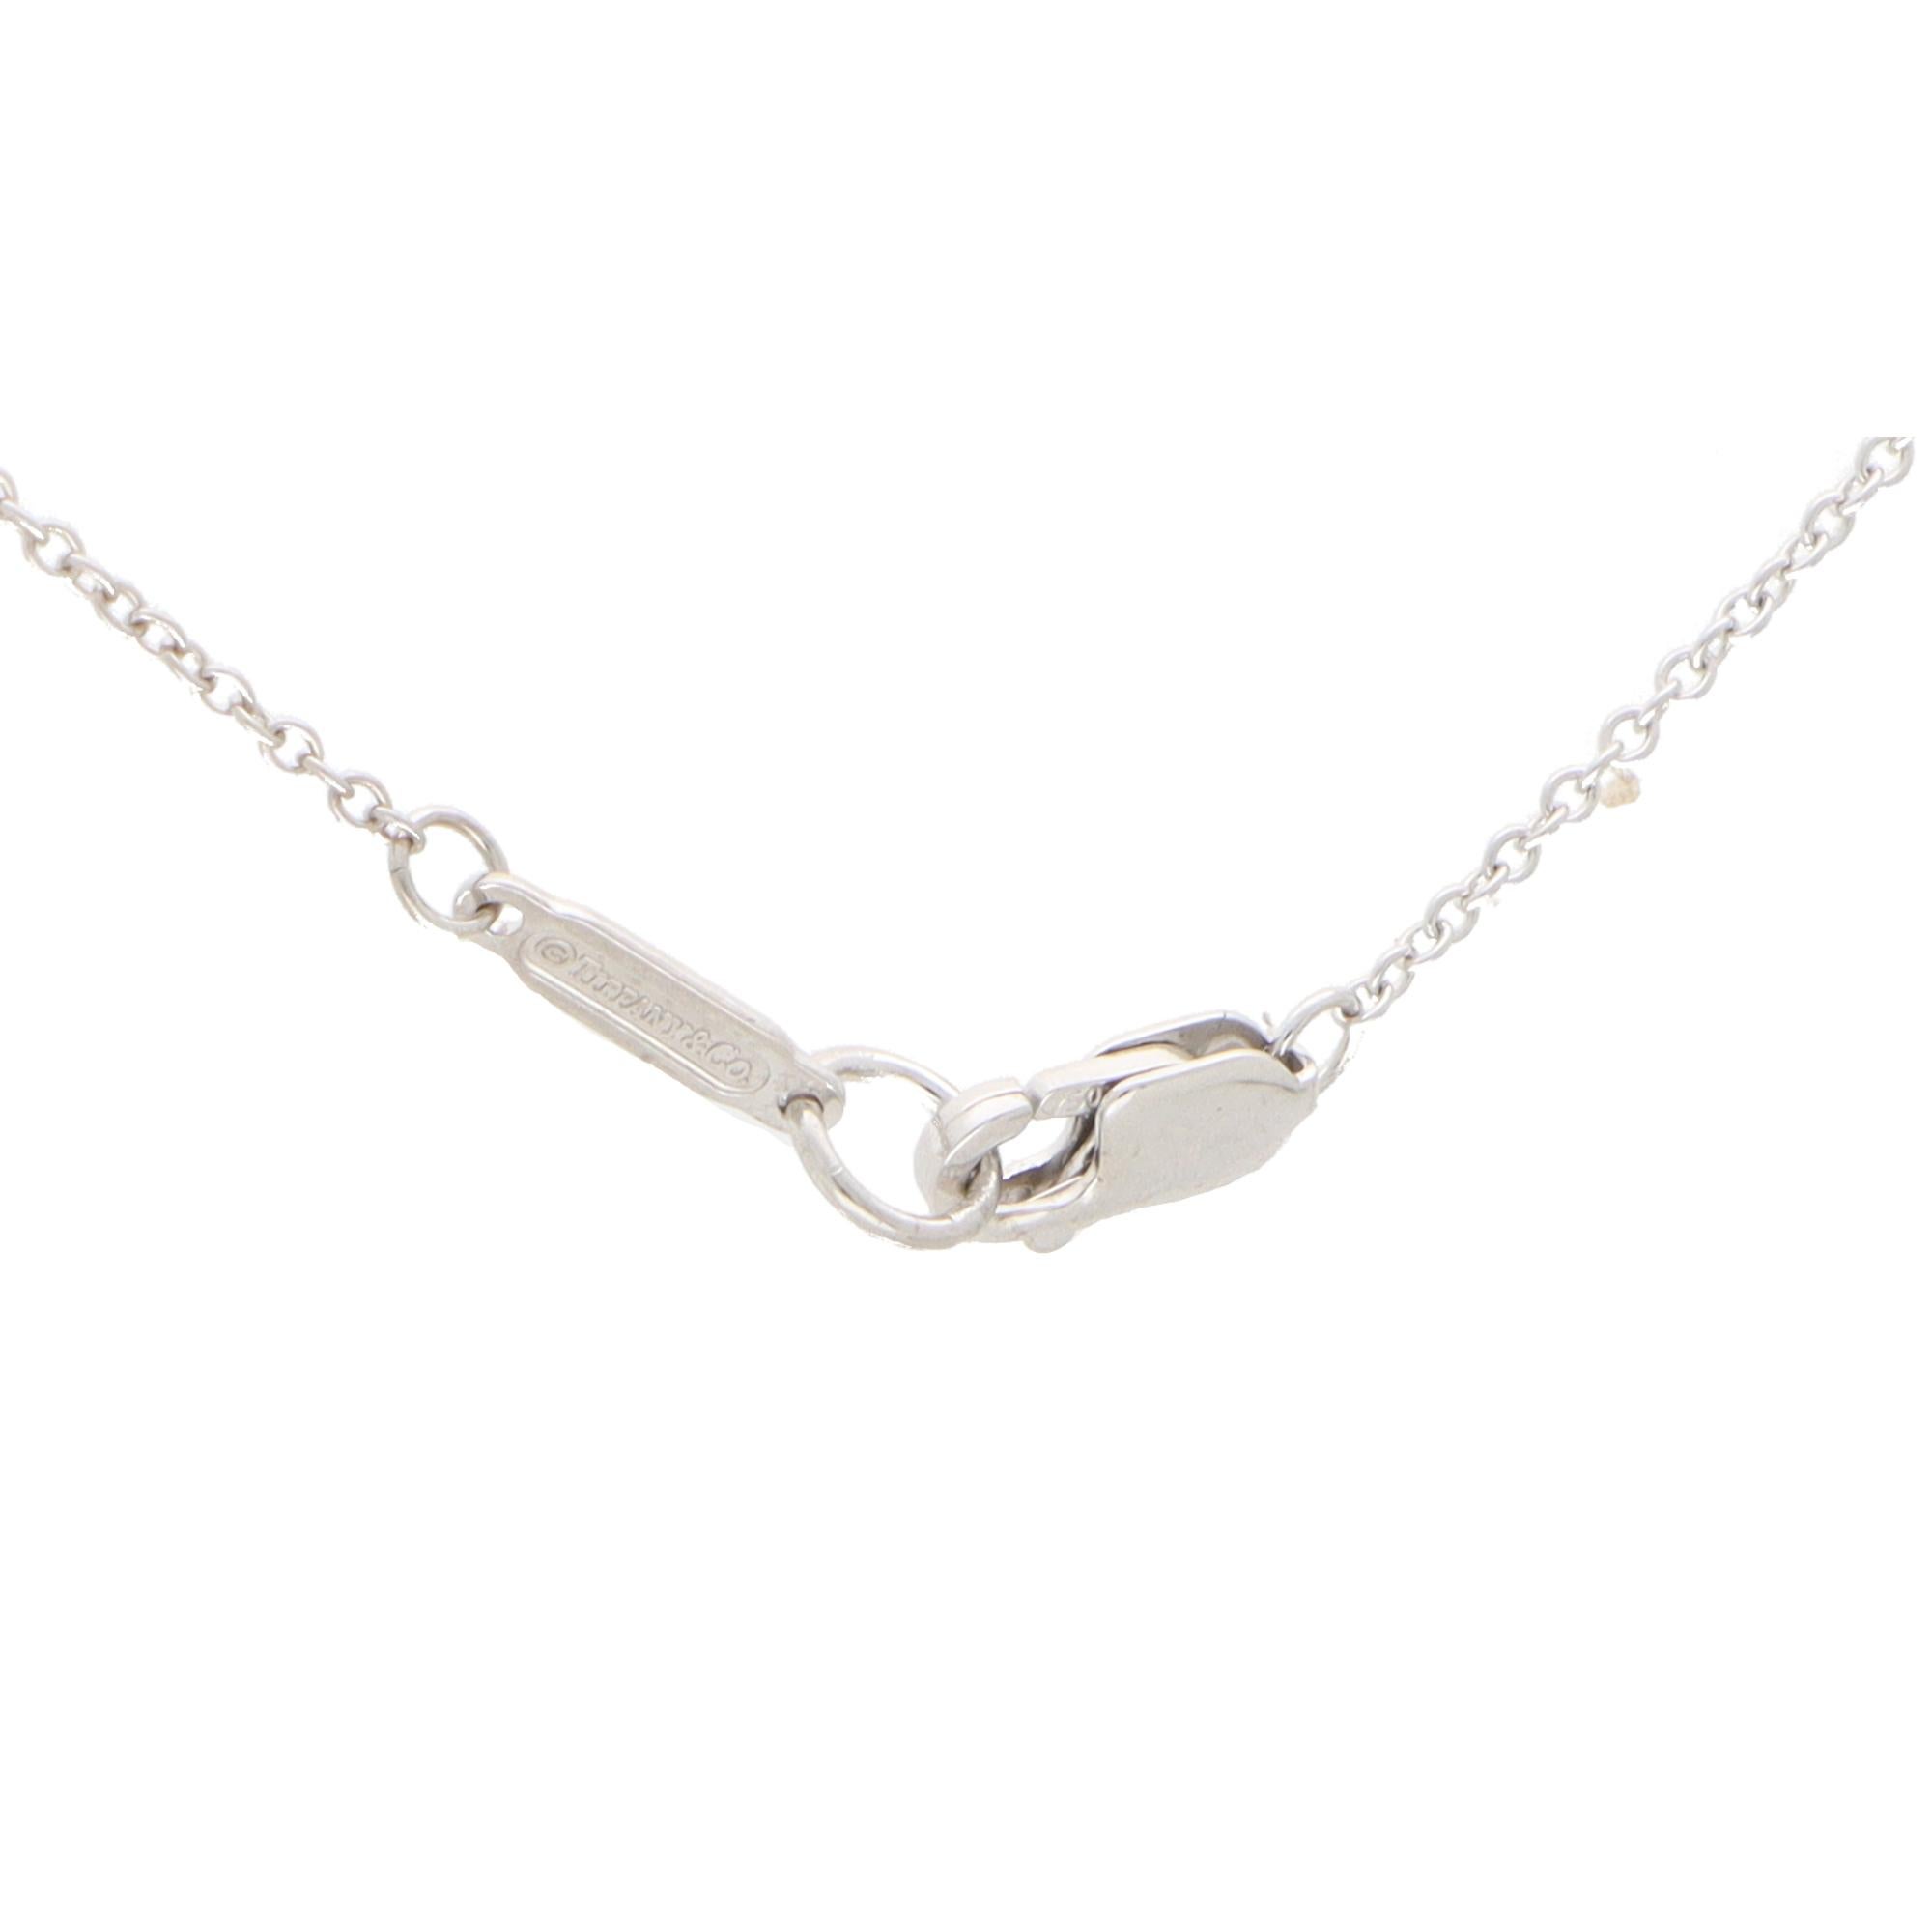 Women's or Men's Vintage Tiffany & Co. Heart Drop Necklace Set in 18k Yellow and White Gold